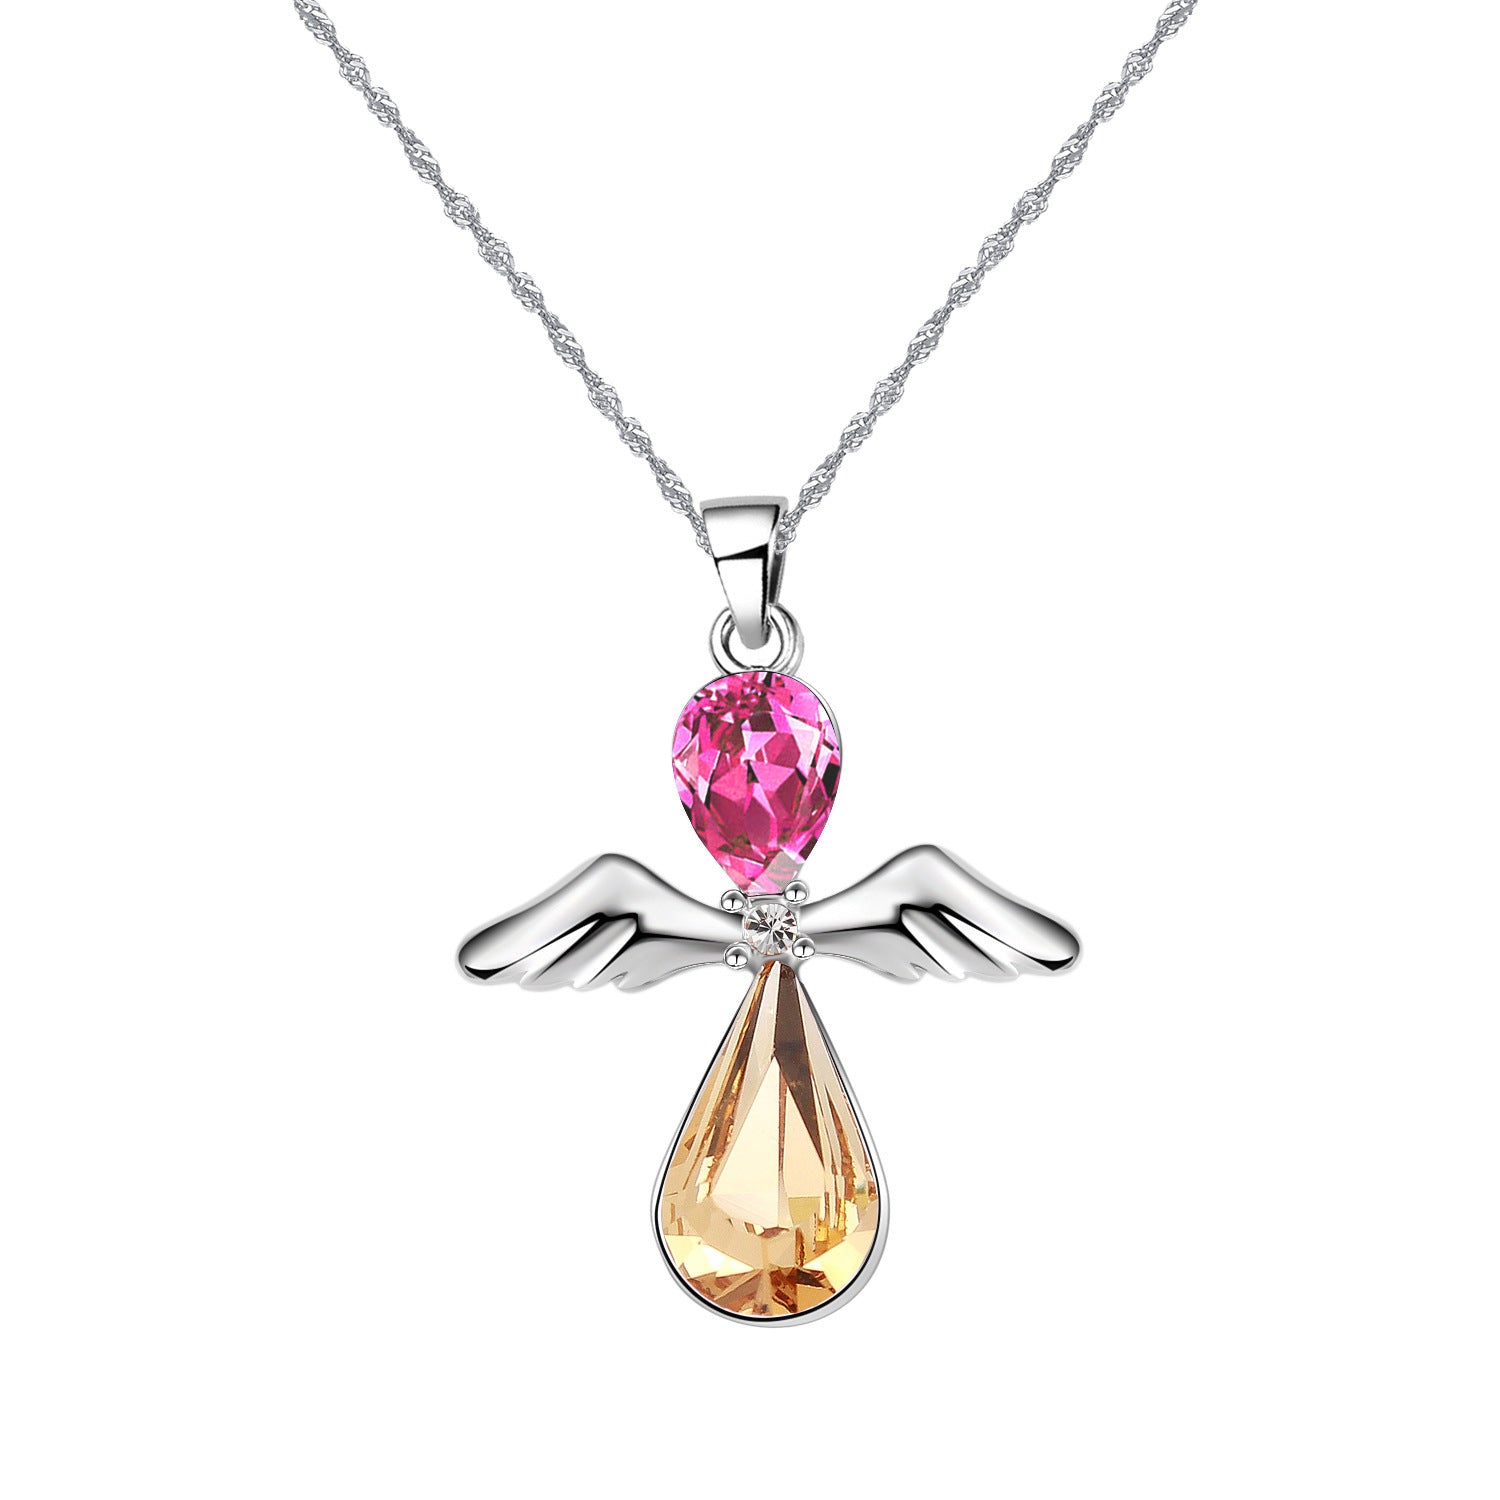 Crystal angel necklace